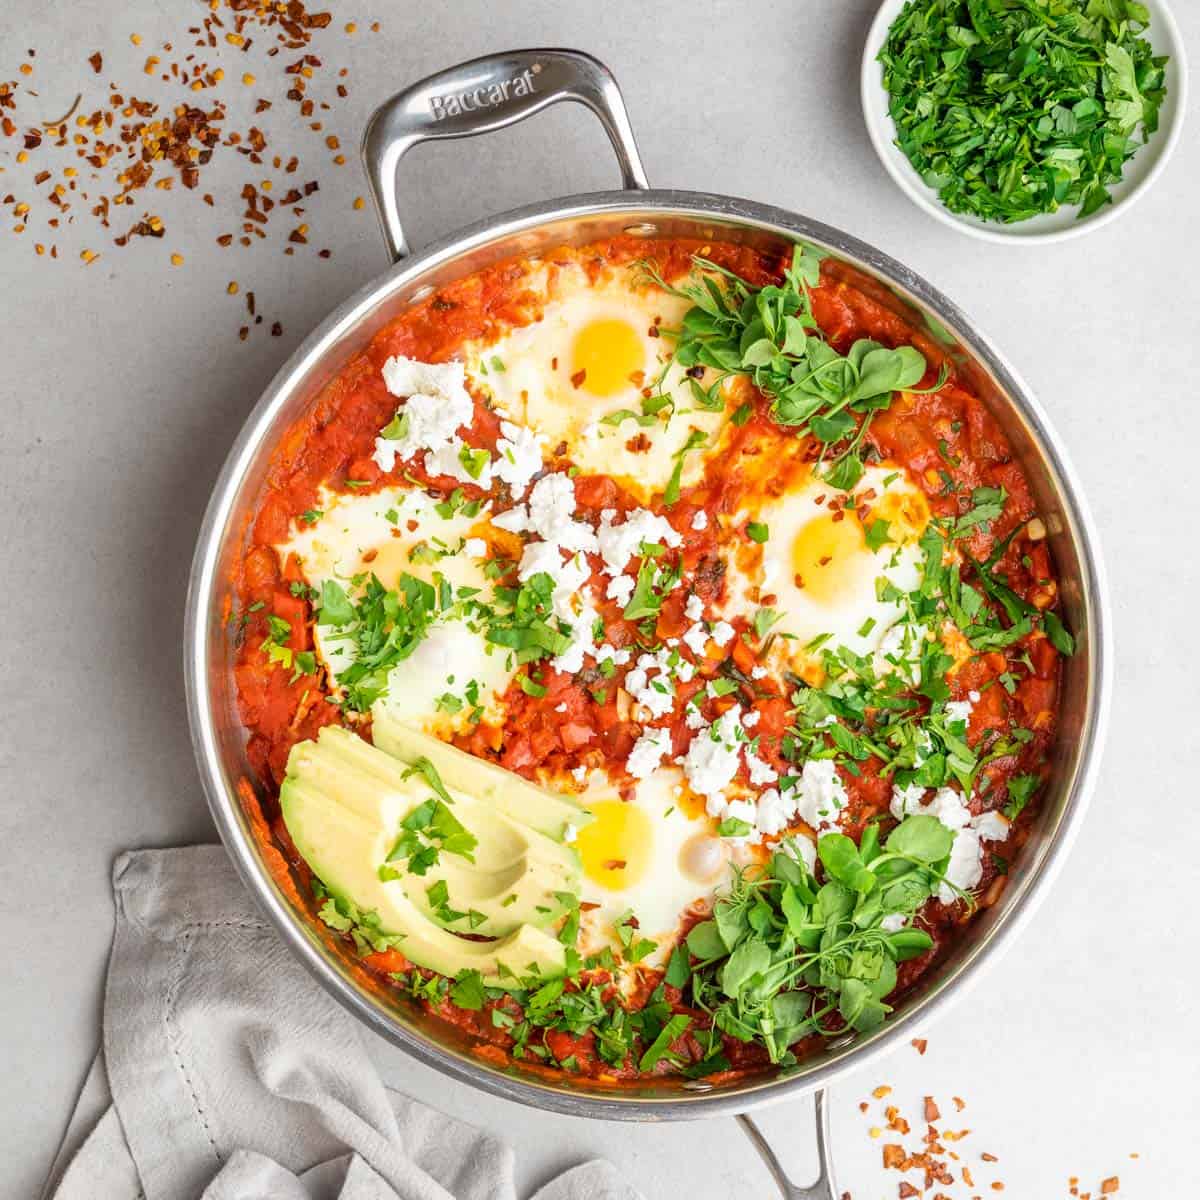 A spicy shakshuka in a skillet on a white counter top.